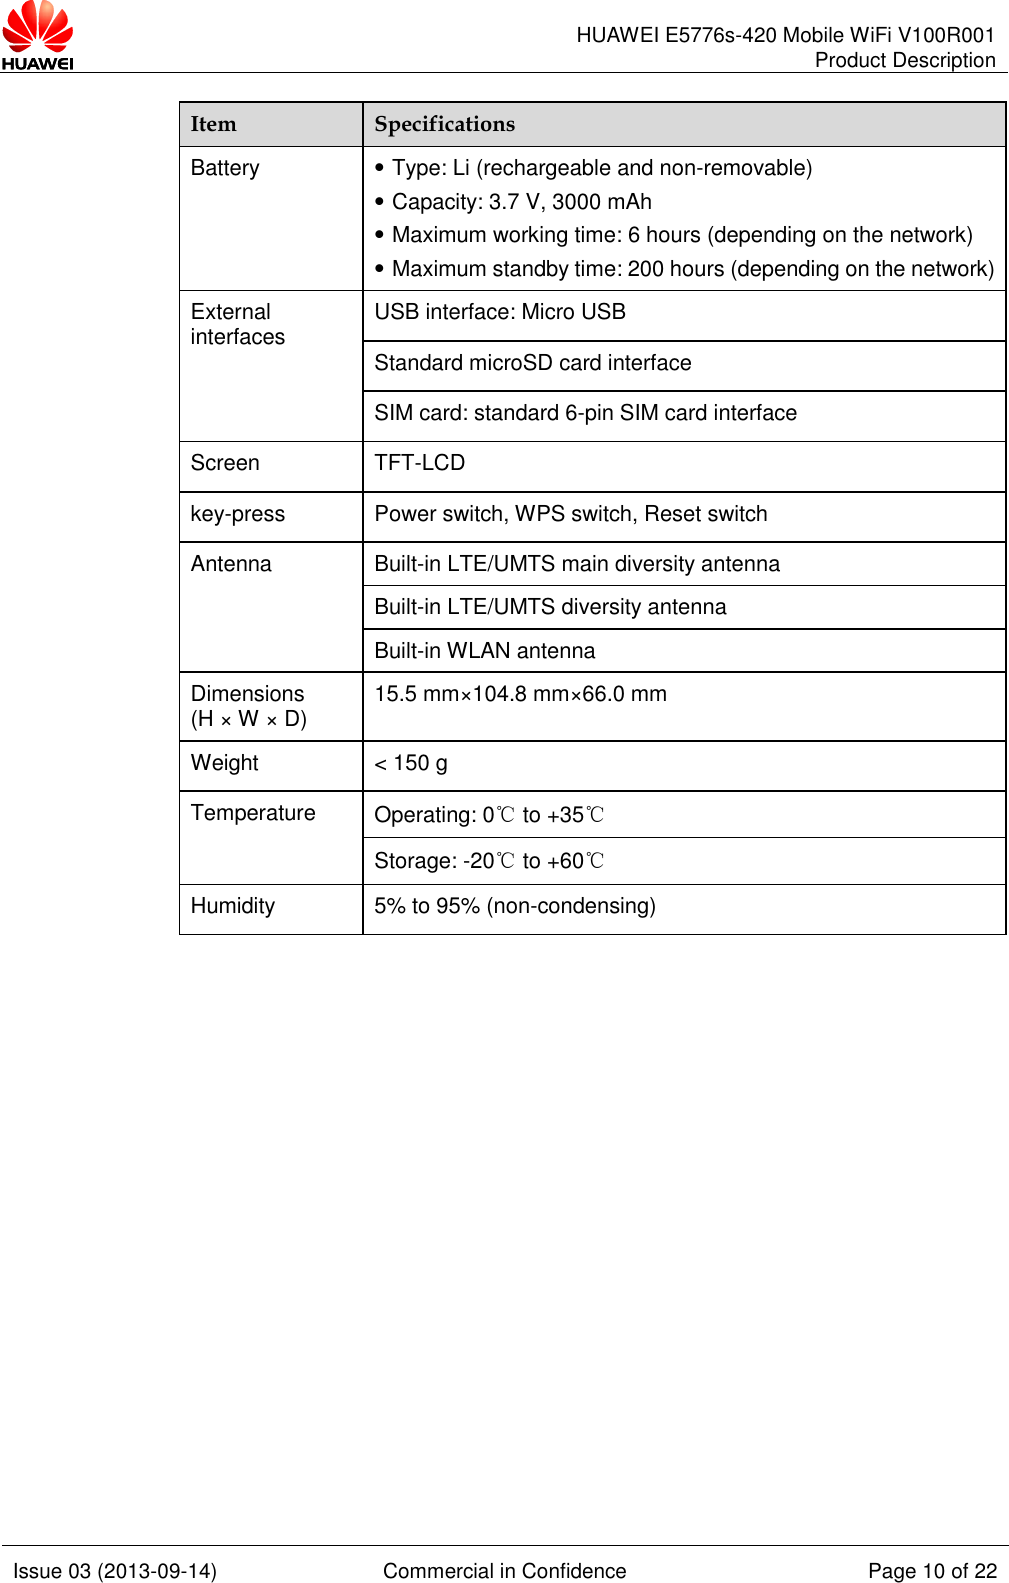      HUAWEI E5776s-420 Mobile WiFi V100R001 Product Description    Issue 03 (2013-09-14) Commercial in Confidence Page 10 of 22  Item Specifications Battery    Type: Li (rechargeable and non-removable)  Capacity: 3.7 V, 3000 mAh  Maximum working time: 6 hours (depending on the network)    Maximum standby time: 200 hours (depending on the network) External interfaces USB interface: Micro USB Standard microSD card interface SIM card: standard 6-pin SIM card interface Screen TFT-LCD key-press Power switch, WPS switch, Reset switch Antenna Built-in LTE/UMTS main diversity antenna Built-in LTE/UMTS diversity antenna Built-in WLAN antenna Dimensions (H × W × D) 15.5 mm×104.8 mm×66.0 mm Weight &lt; 150 g Temperature Operating: 0℃ to +35℃ Storage: -20℃ to +60℃ Humidity 5% to 95% (non-condensing)              